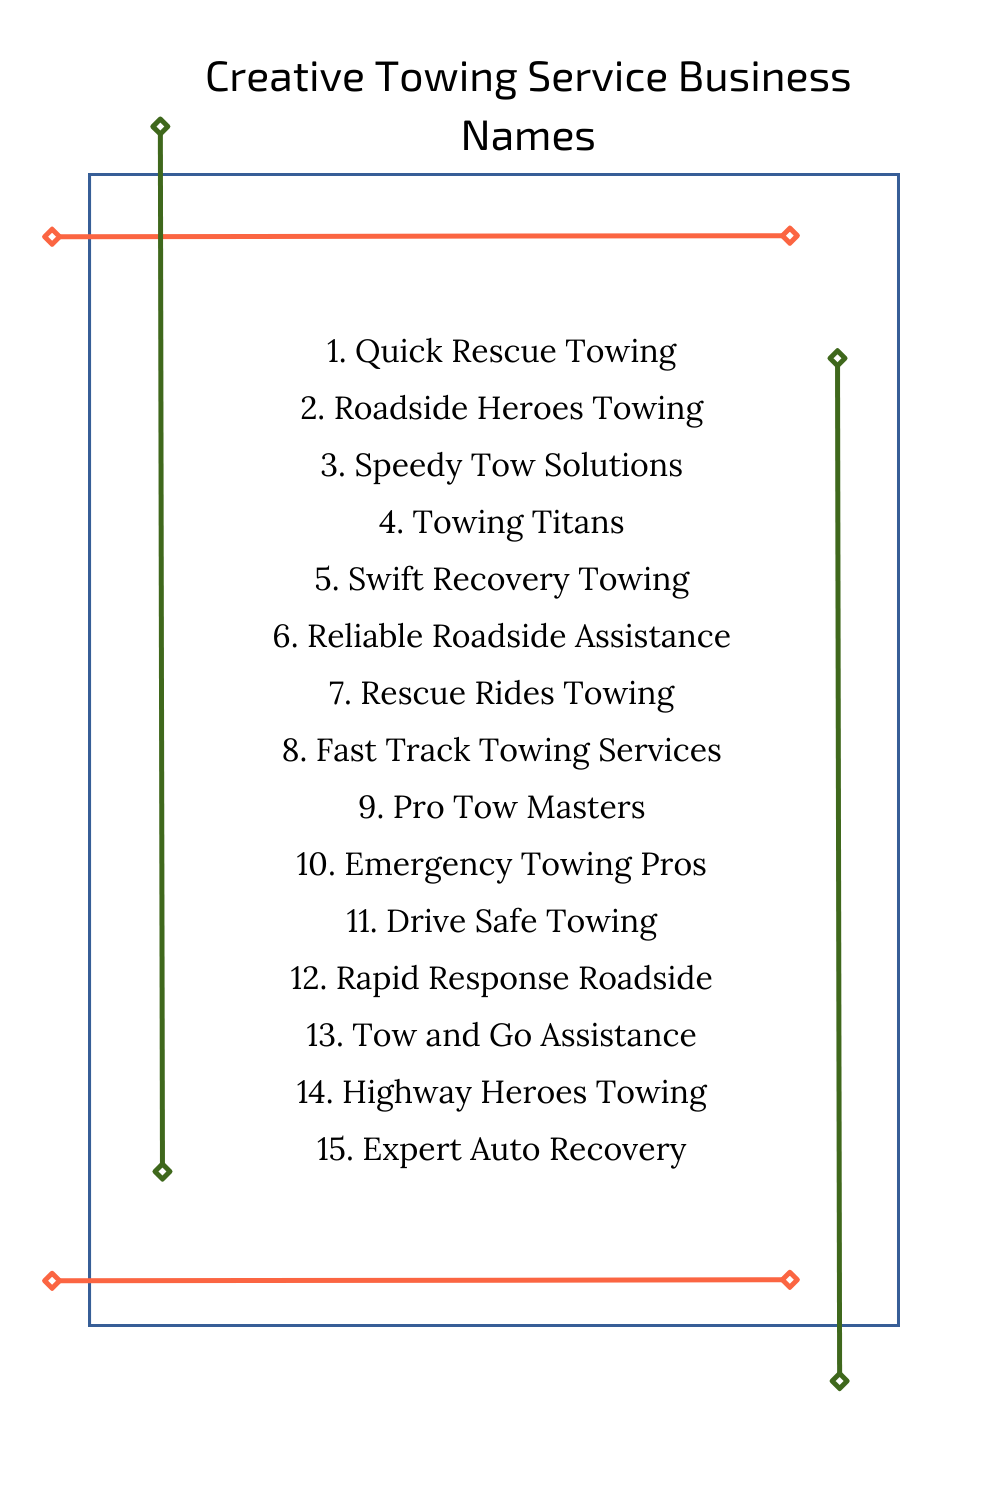 Creative Towing Service Business Names